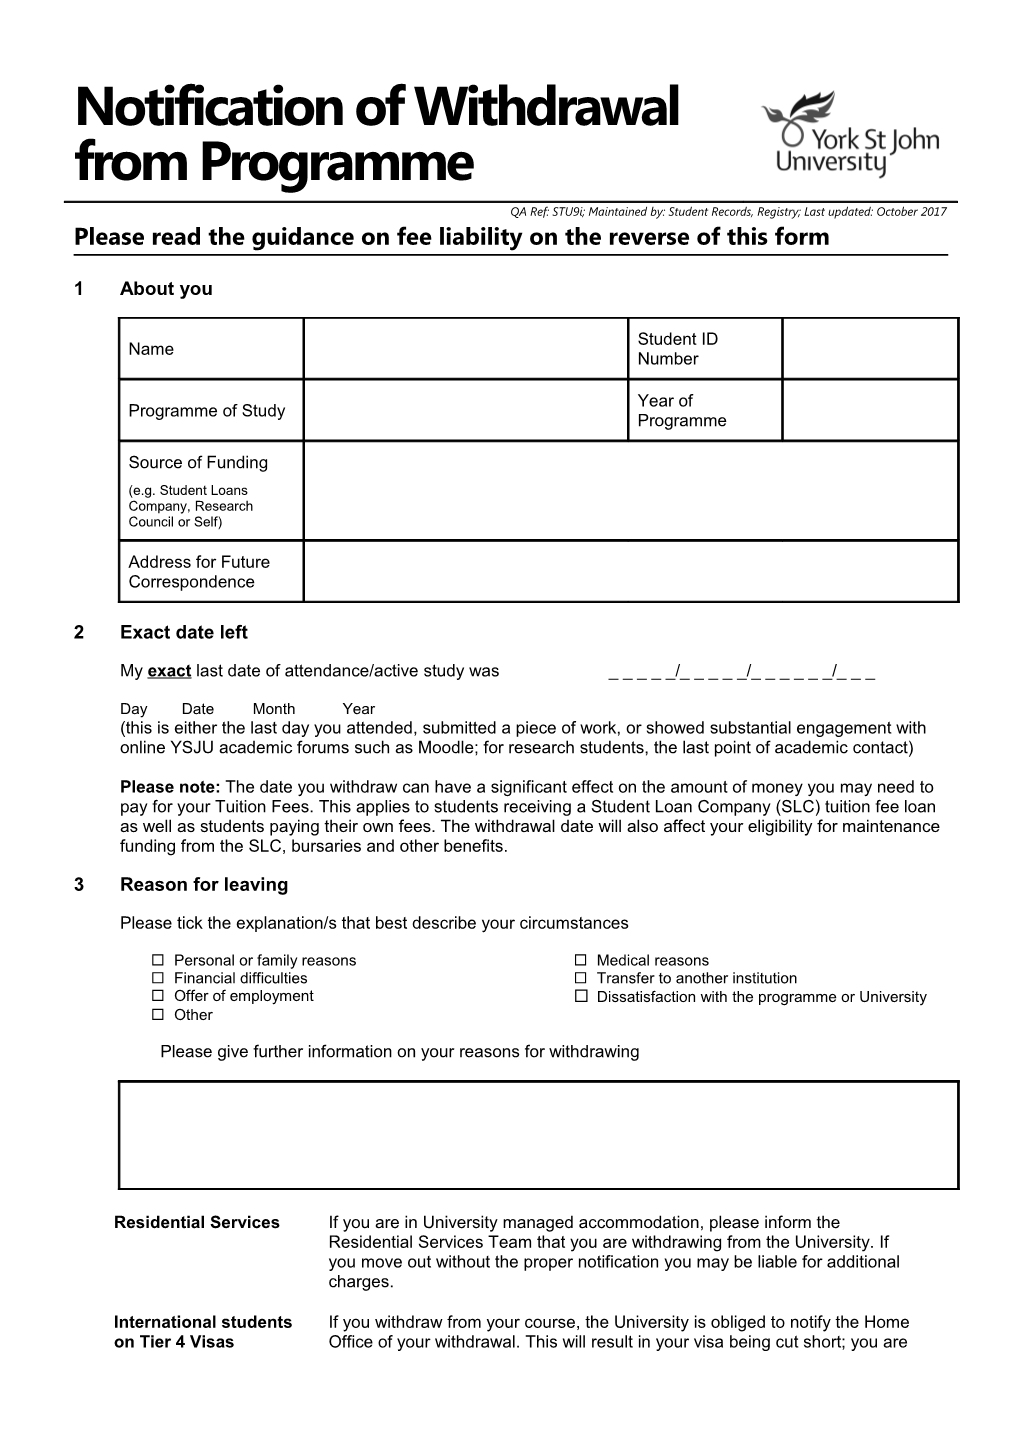 Please Read the Guidance on Fee Liability on the Reverse of This Form